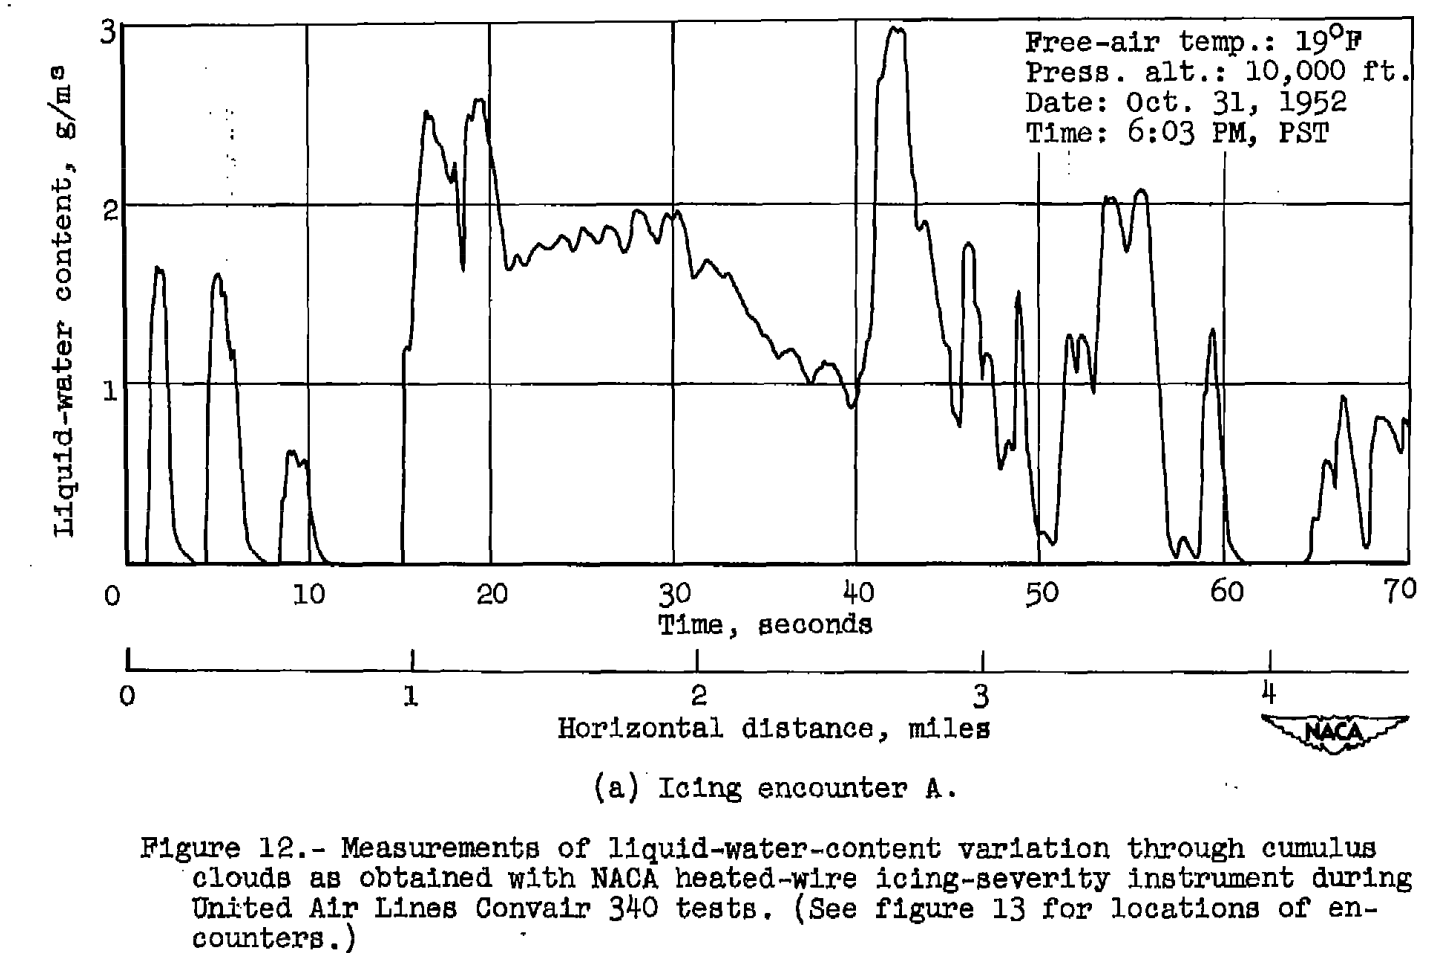 Figure 12a from NACA-RM-A54I23. Measurements of liquid-water-content variations through cumulus clouds as obtained with NACA heated-wire icing-severity instrument during United Air Lines Convair 340 tests. (see figure 13 for locations of counters.)